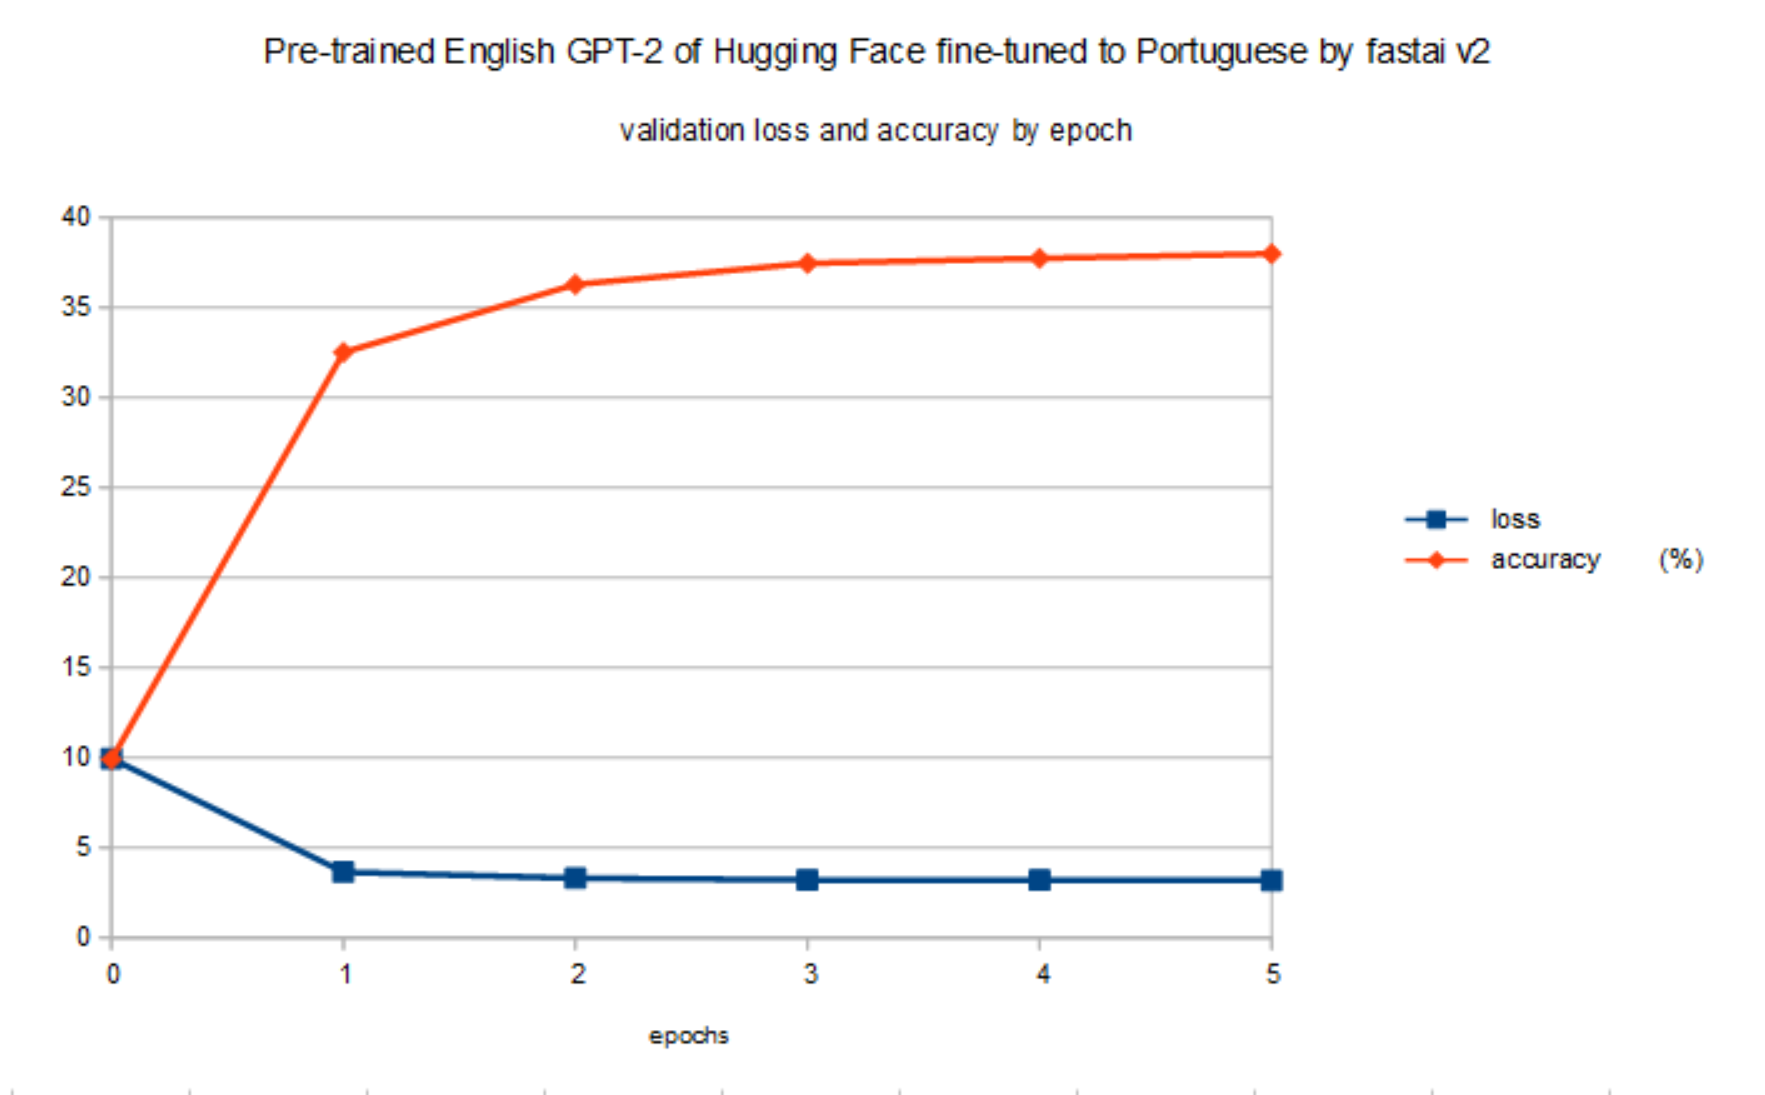 Validation loss and accuracy of pre-trained English GPT-2 of Hugging Face fine-tuned to Portuguese by fastai v2